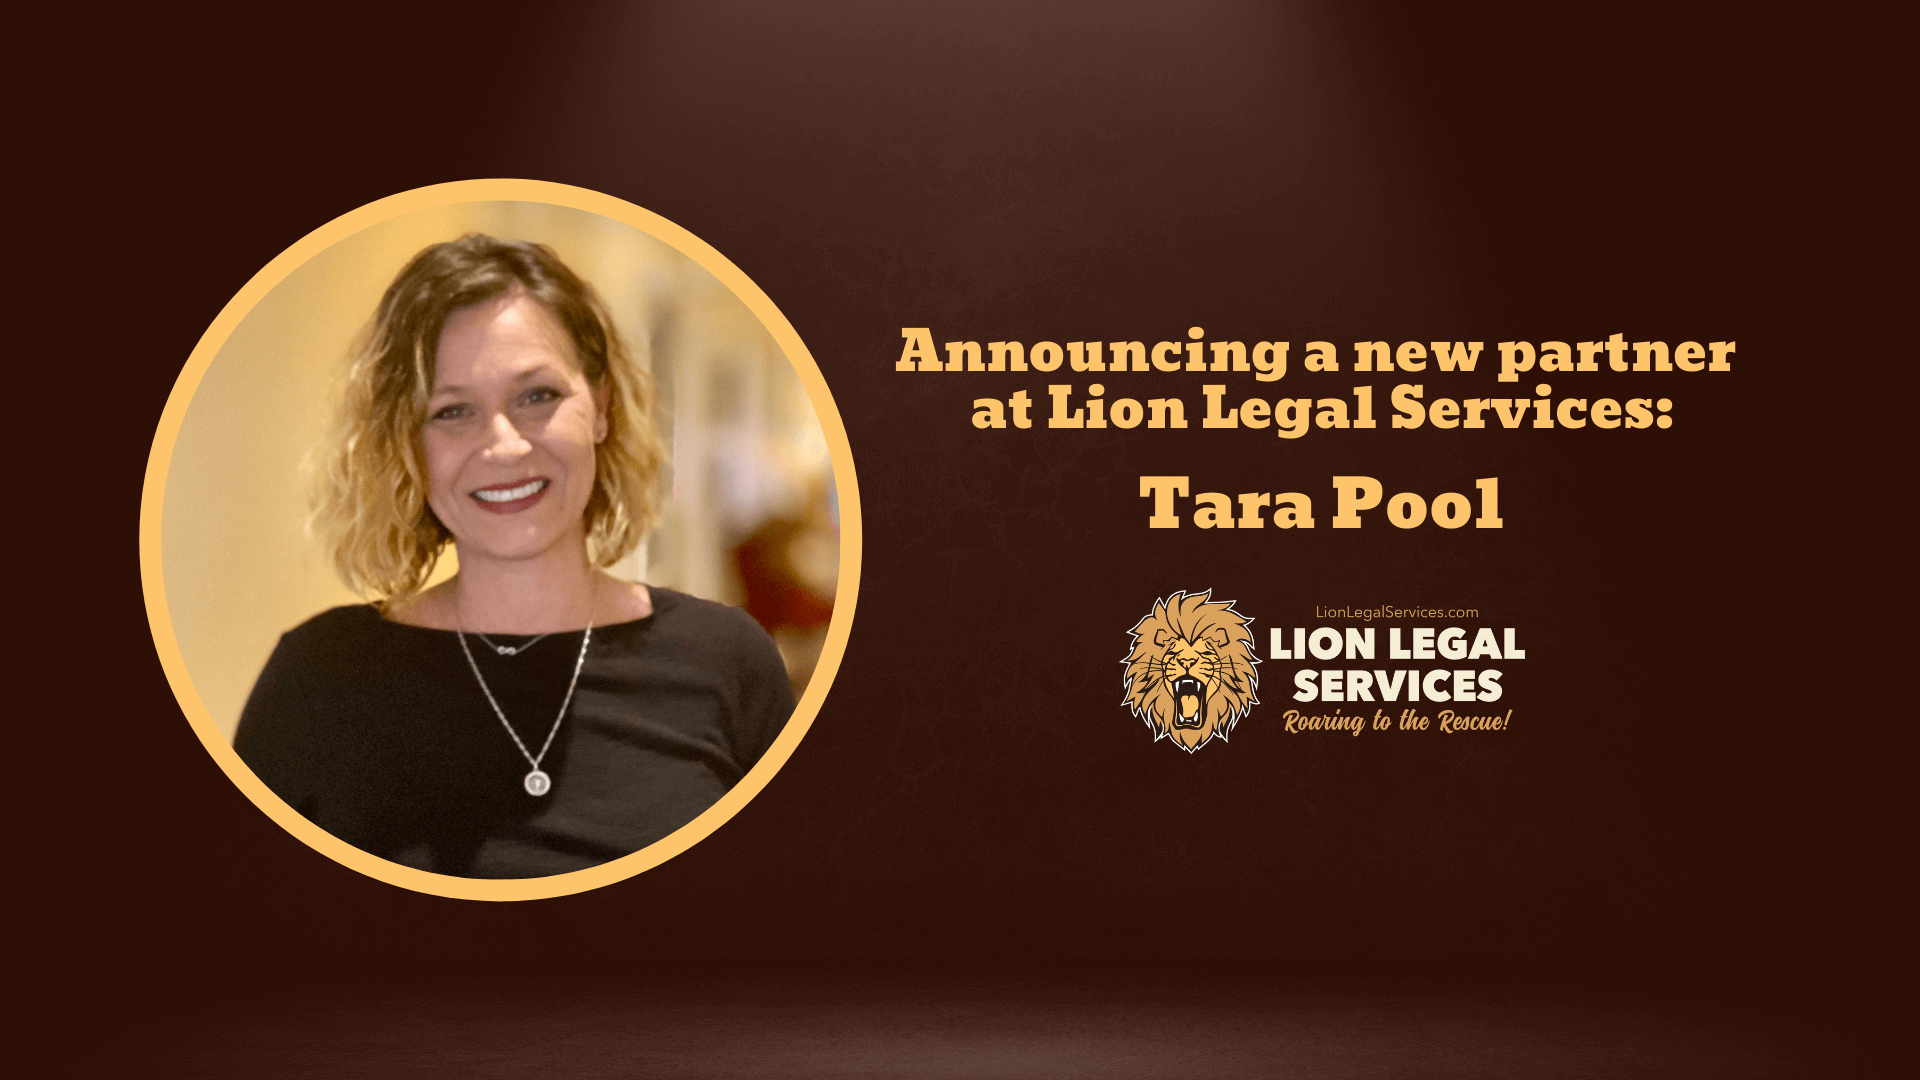 Photo and announcement of our new partner Tara Pool, at Lion Legal Services in central Arkansas